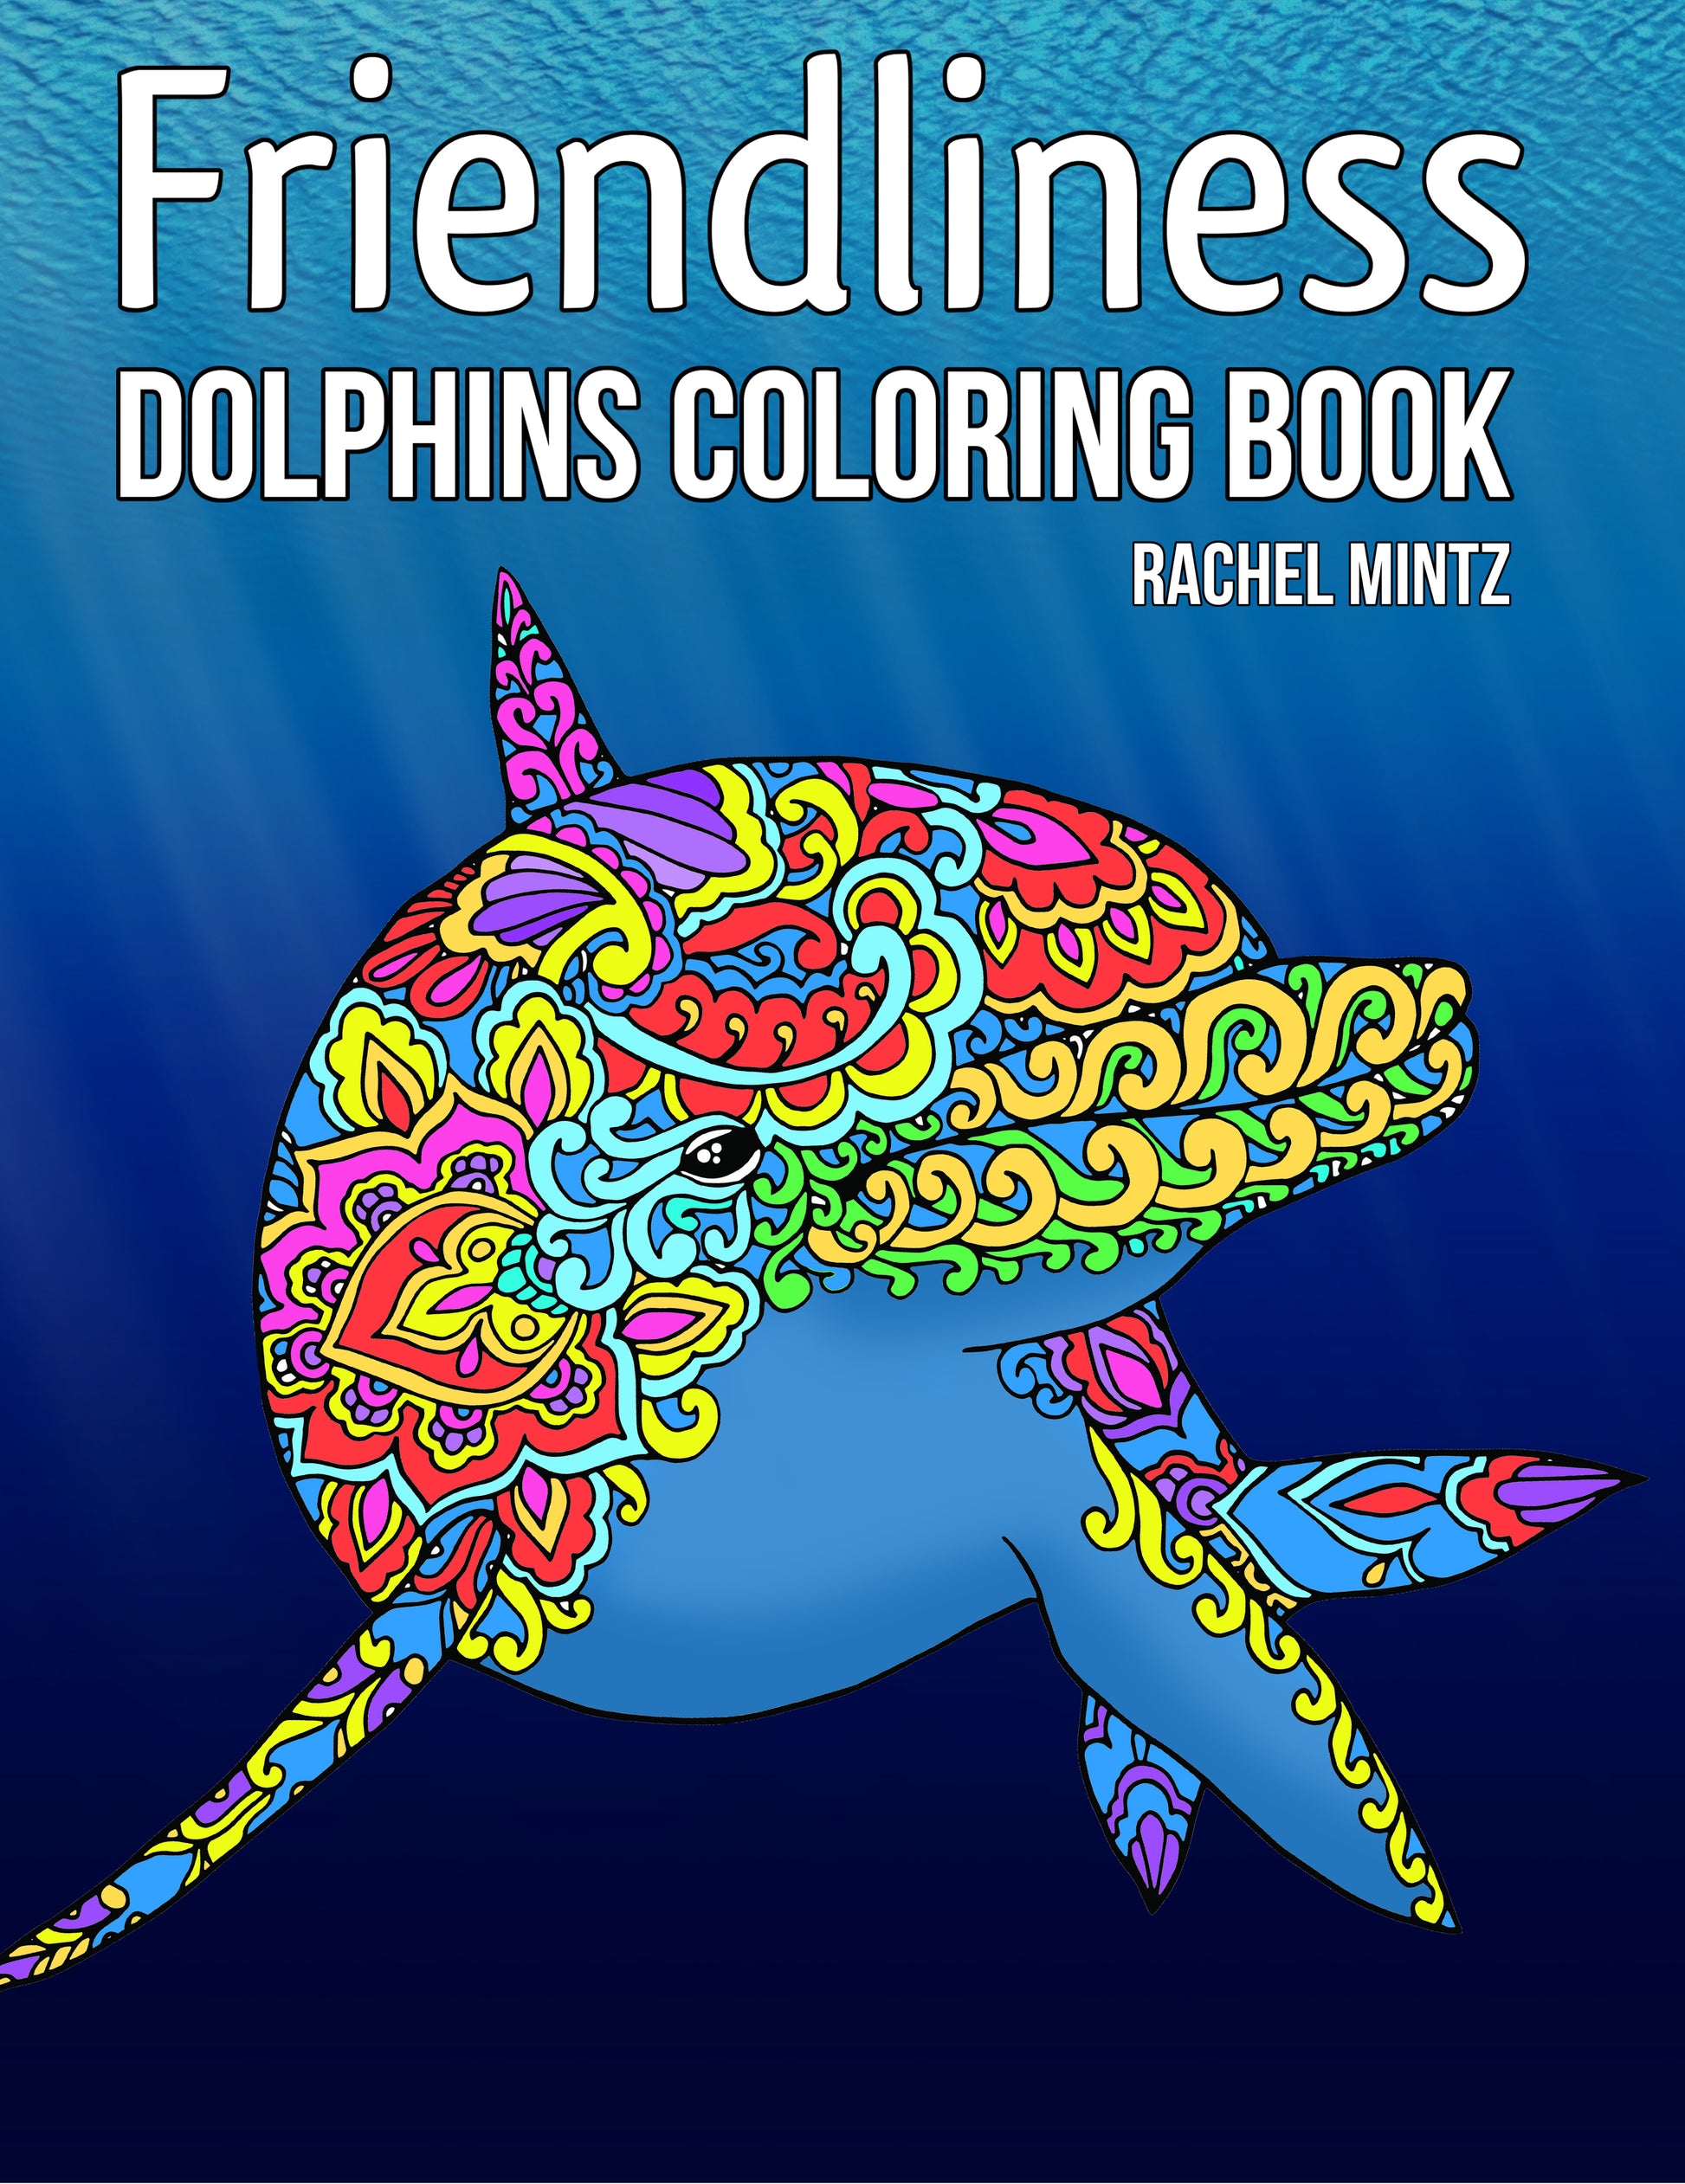 Dolphins Coloring Book -Relaxing Patterns With Playful Dolphins RAchel Mintz 